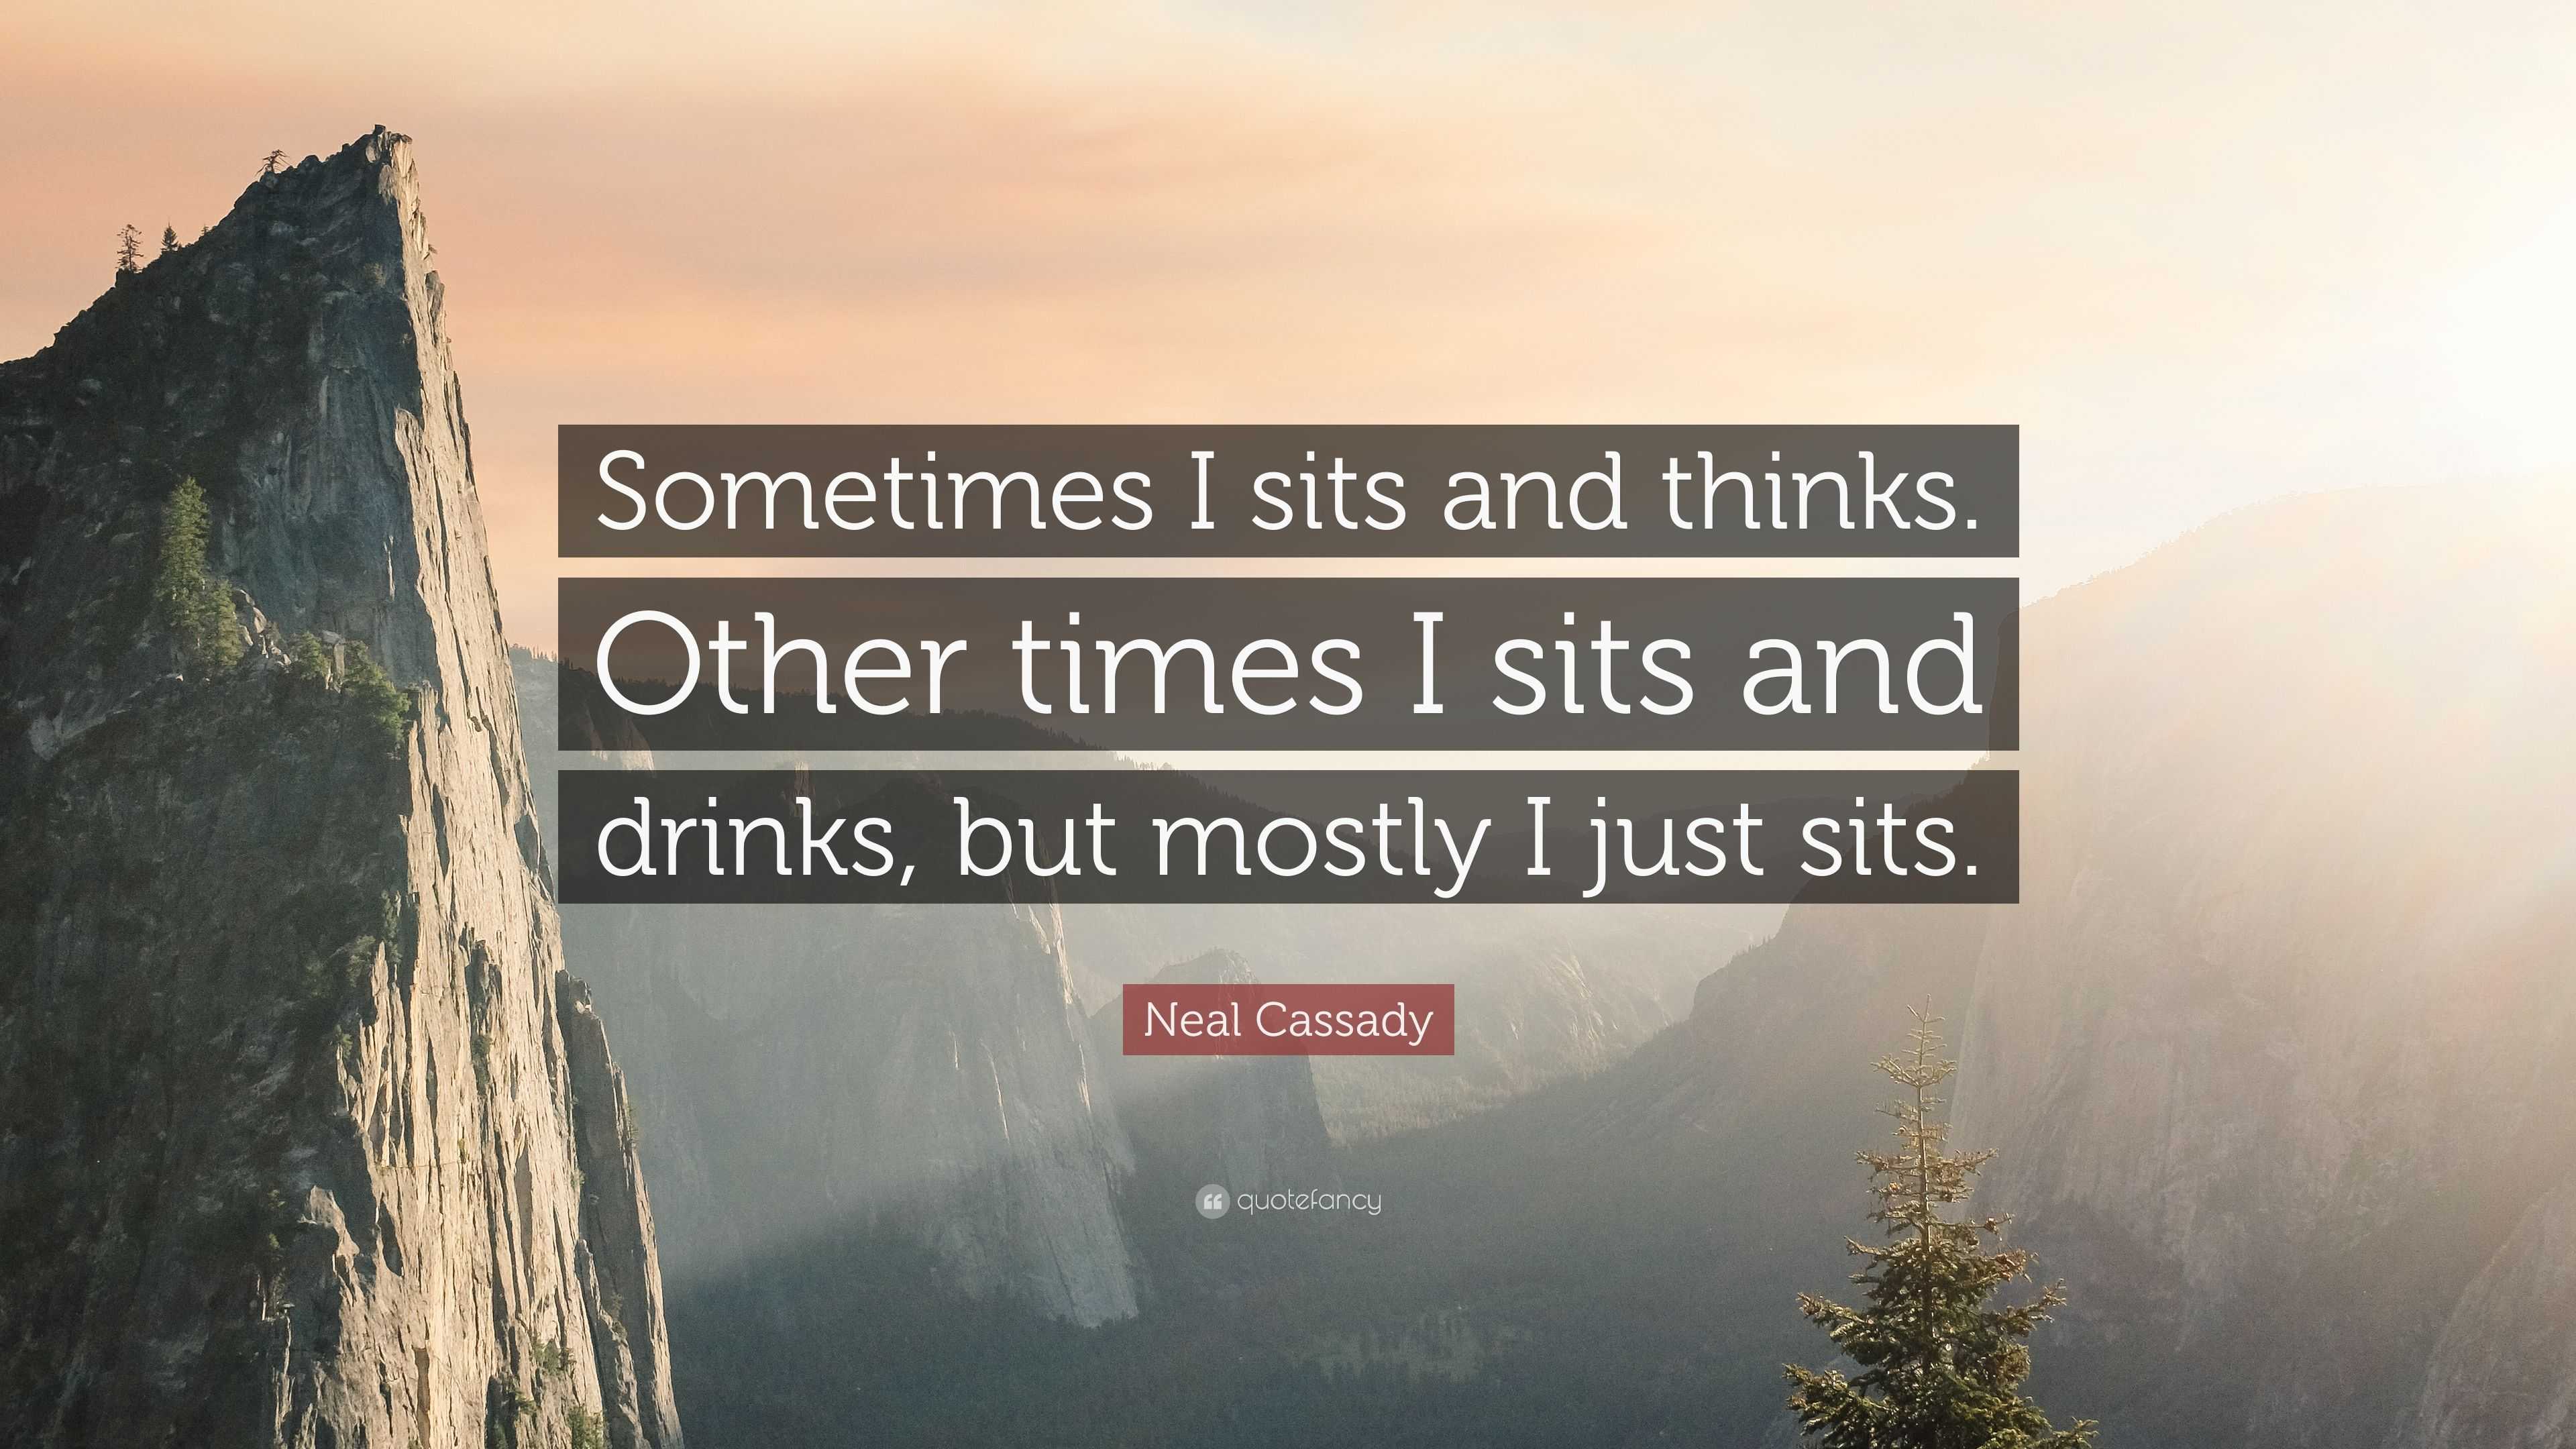 Neal Cassady Quote “sometimes I Sits And Thinks Other Times I Sits And Drinks But Mostly I 0382